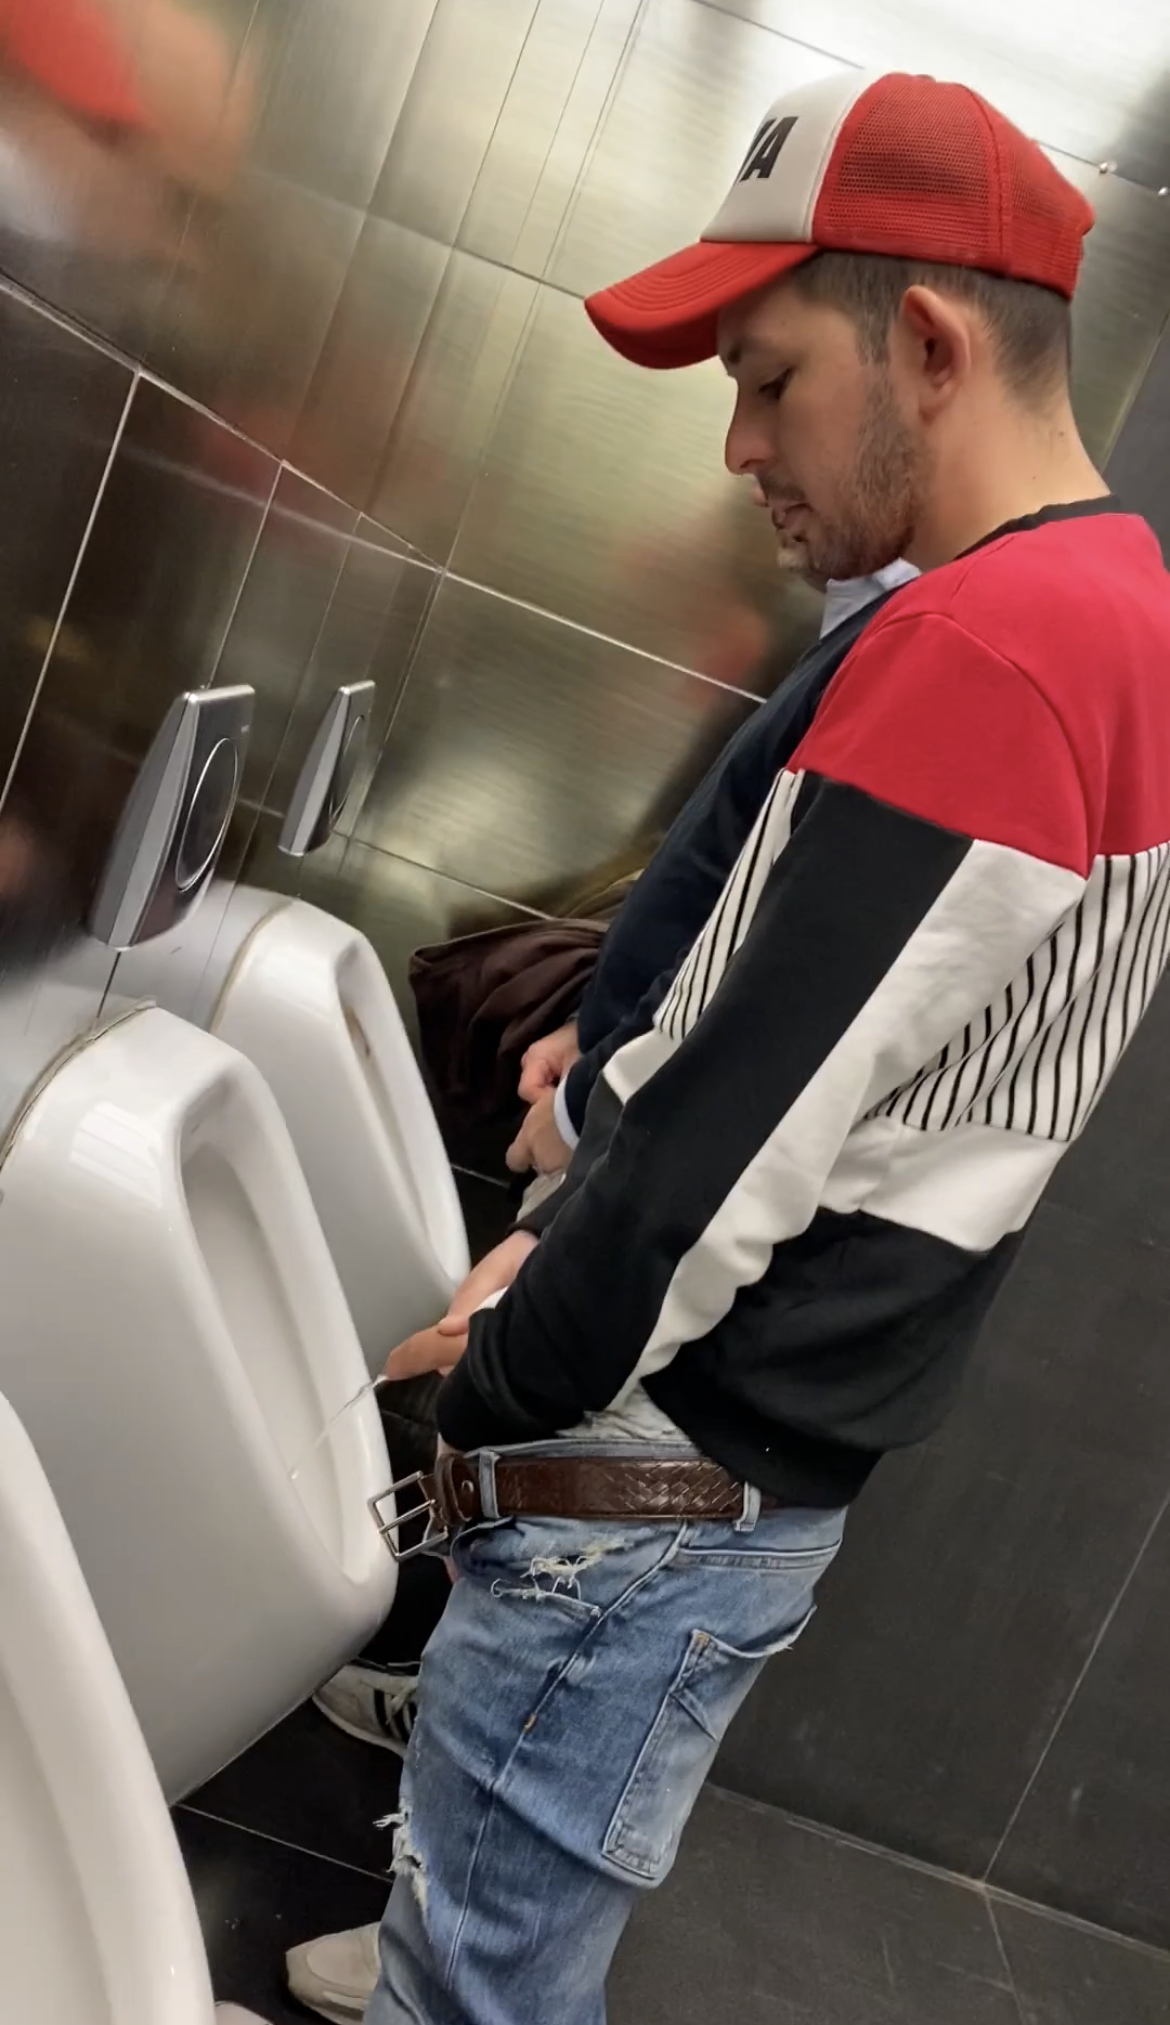 HANDSOME GUY AT THE URINALS